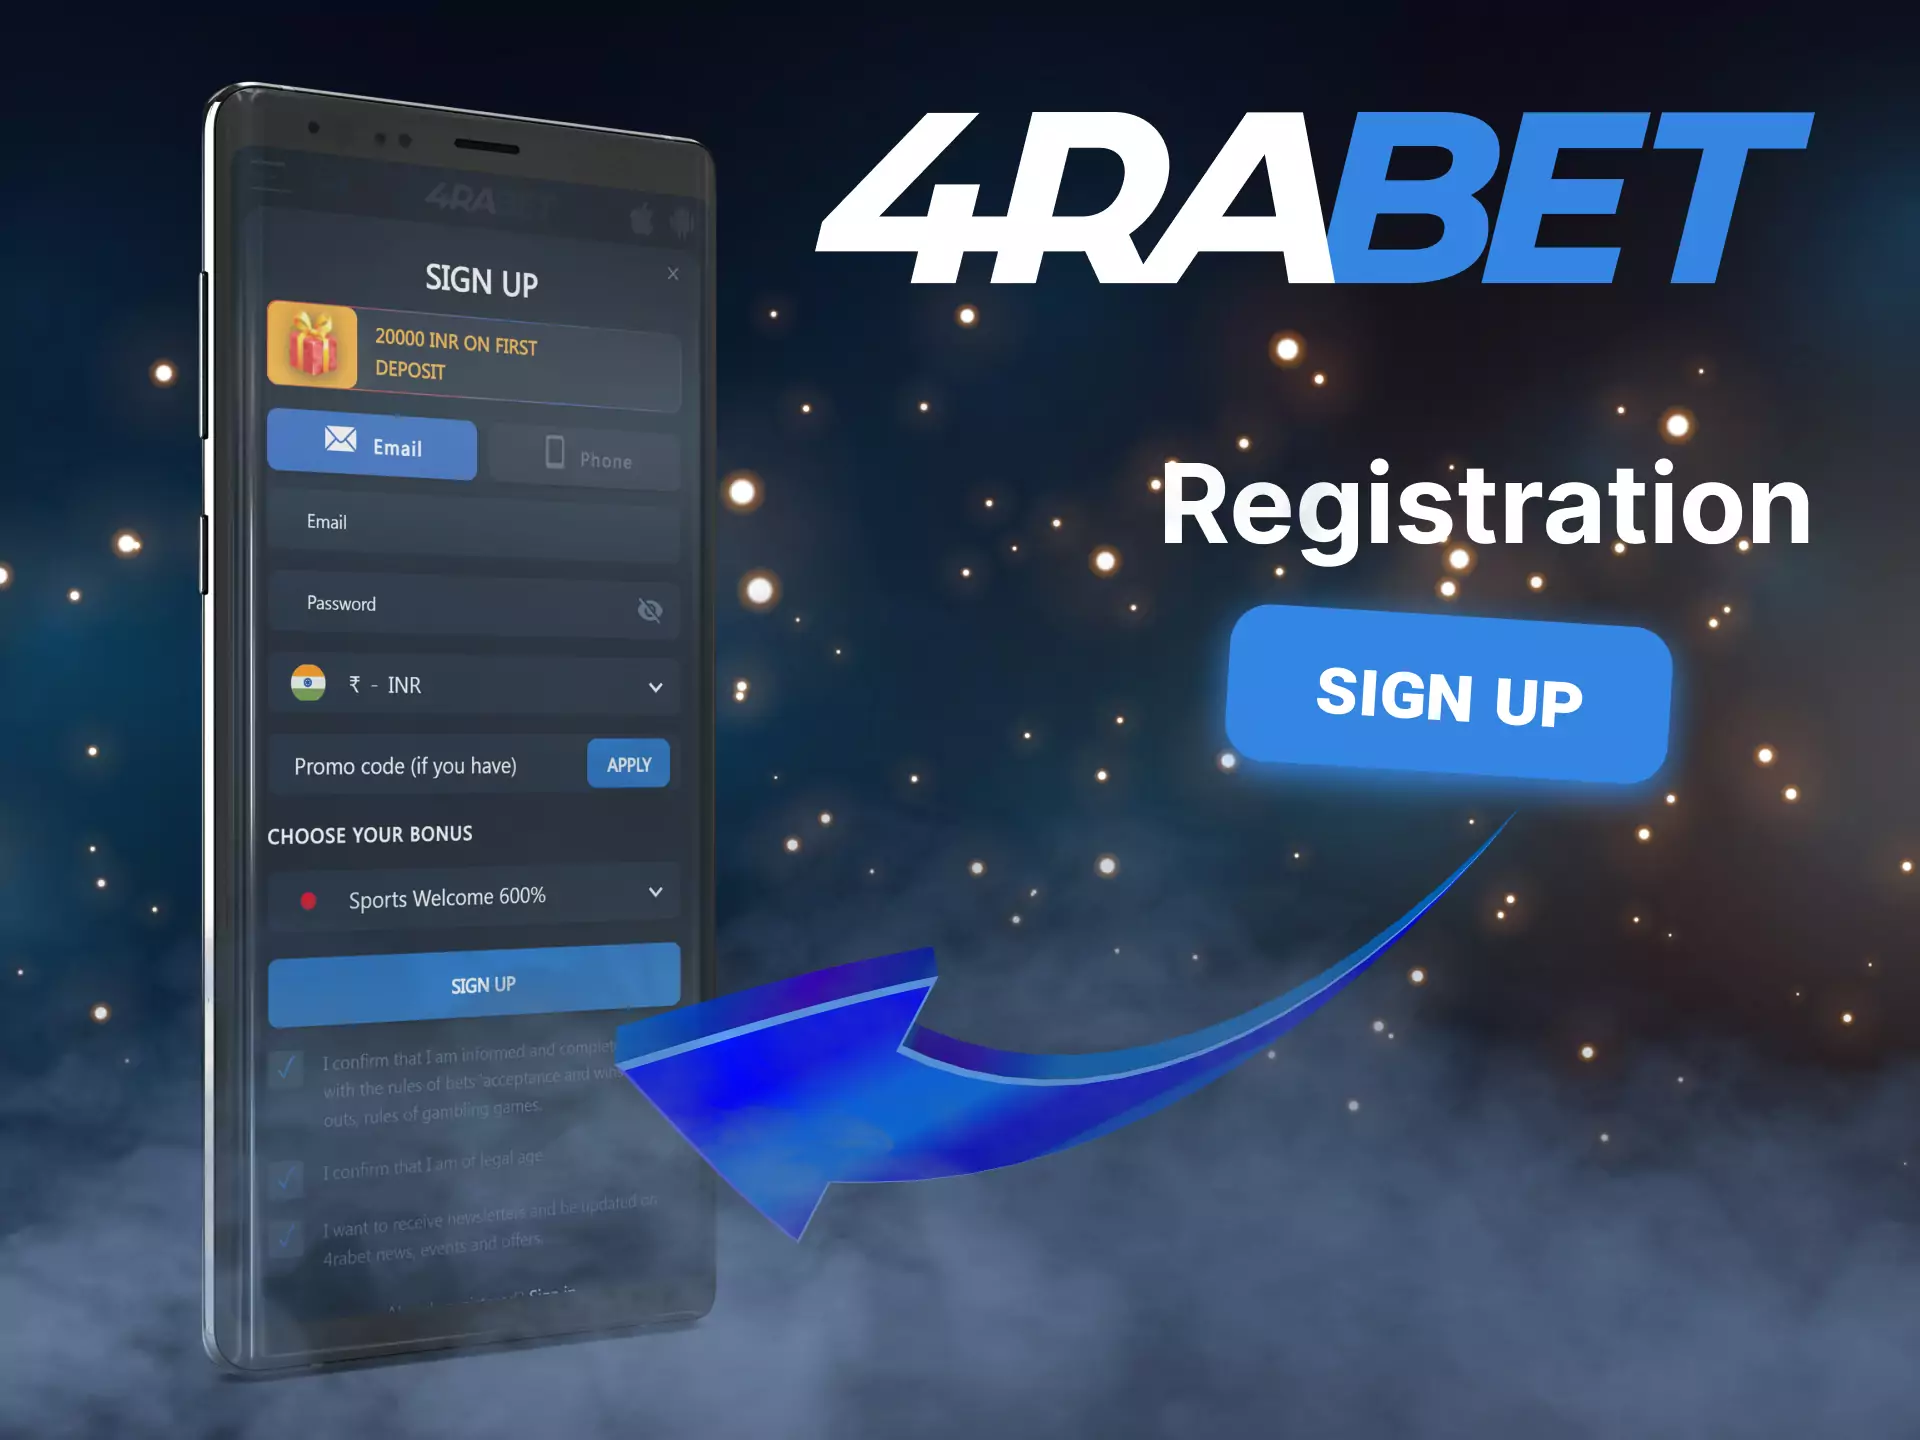 Complete a simple registration in the mobile app 4rabet.